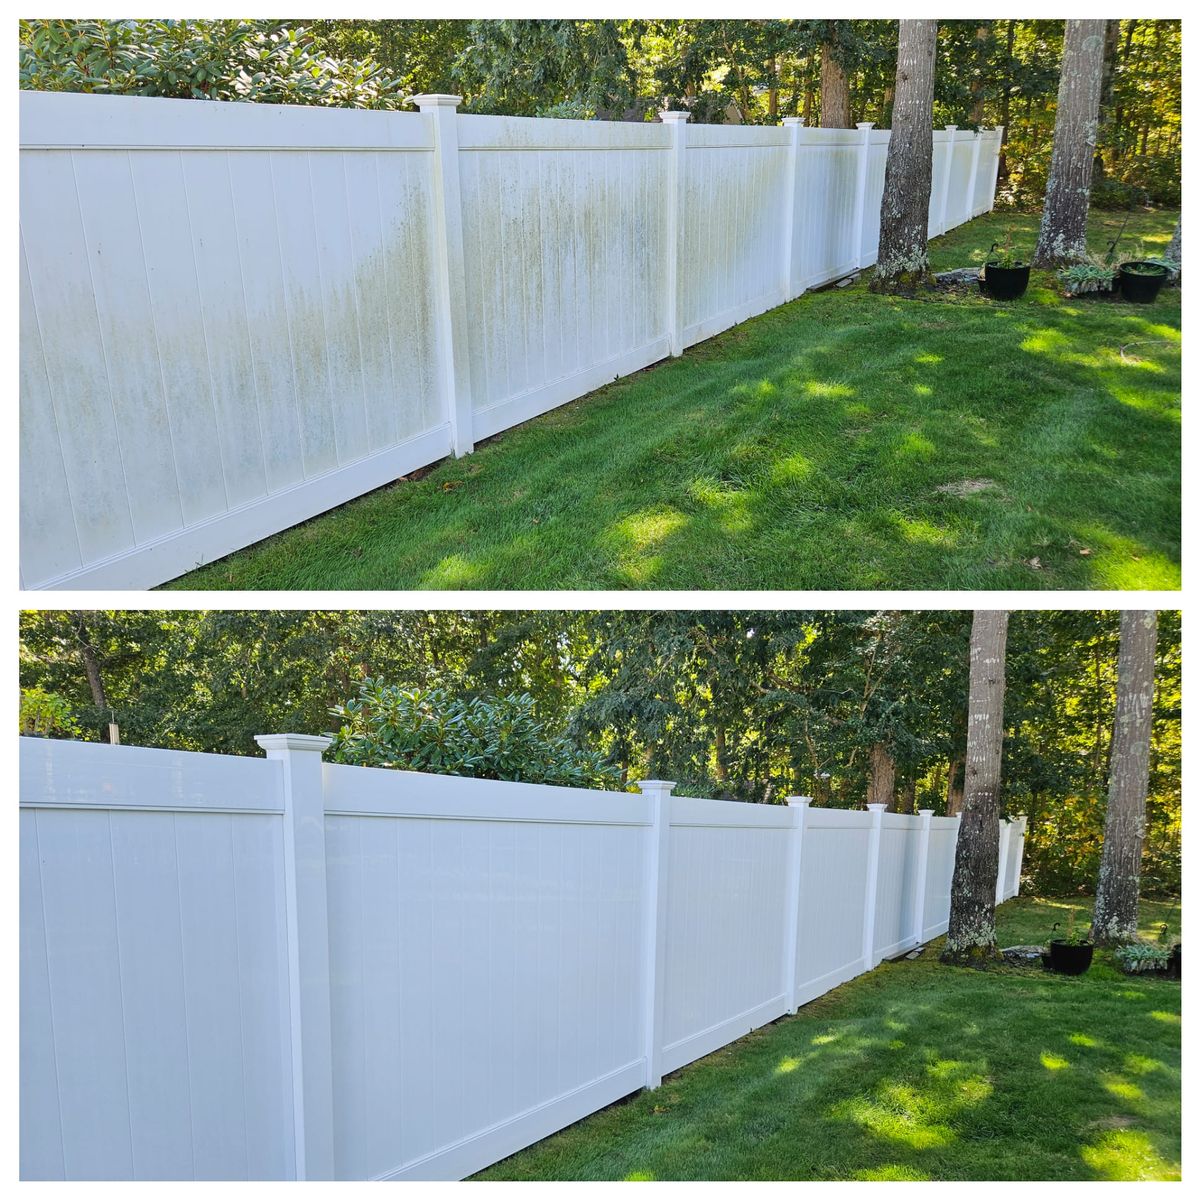 Fence Washing for Curb Appeal Power Washing in Waretown, New Jersey